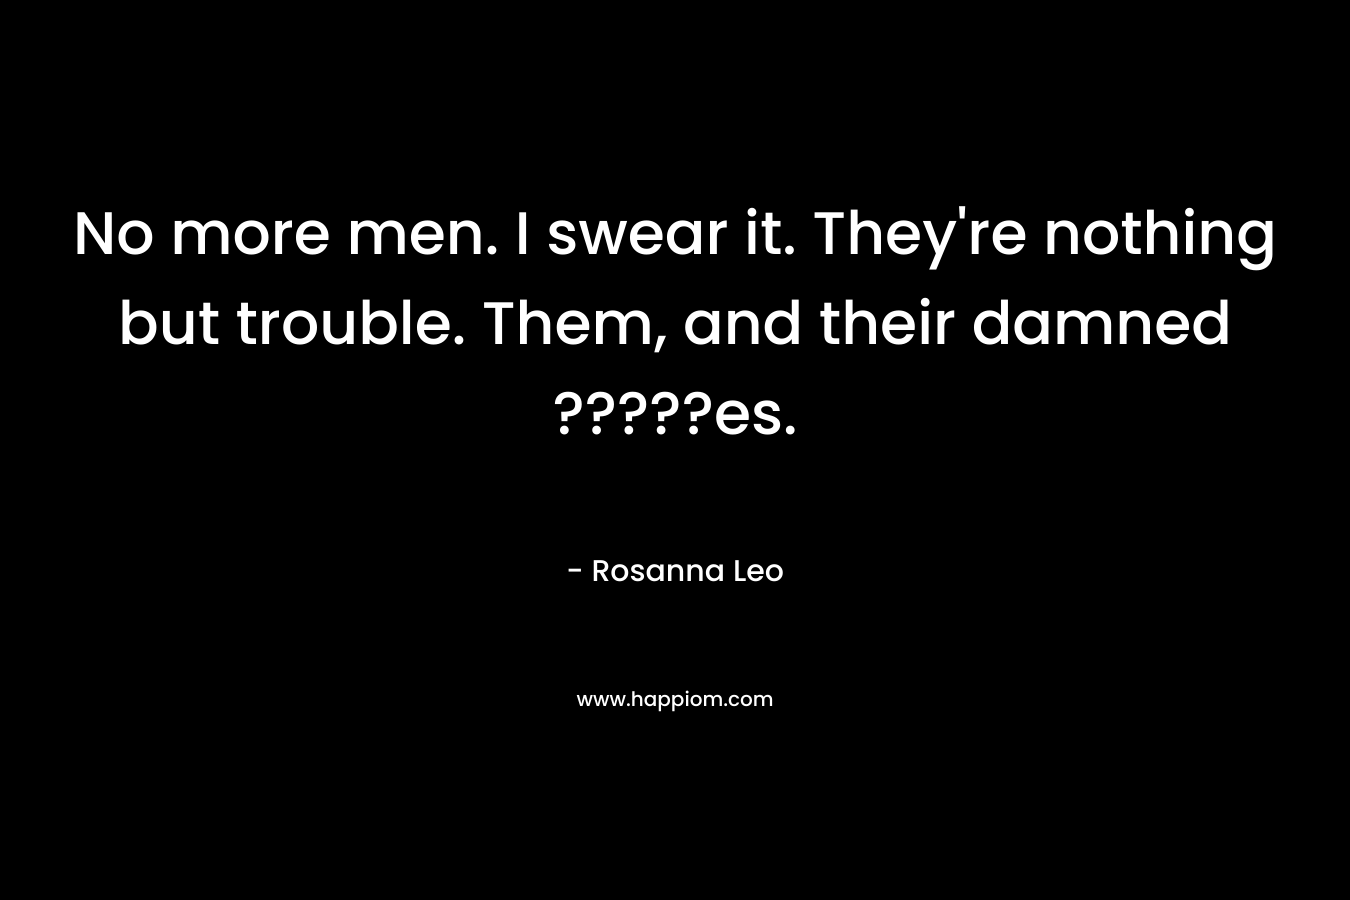 No more men. I swear it. They’re nothing but trouble. Them, and their damned ?????es. – Rosanna Leo